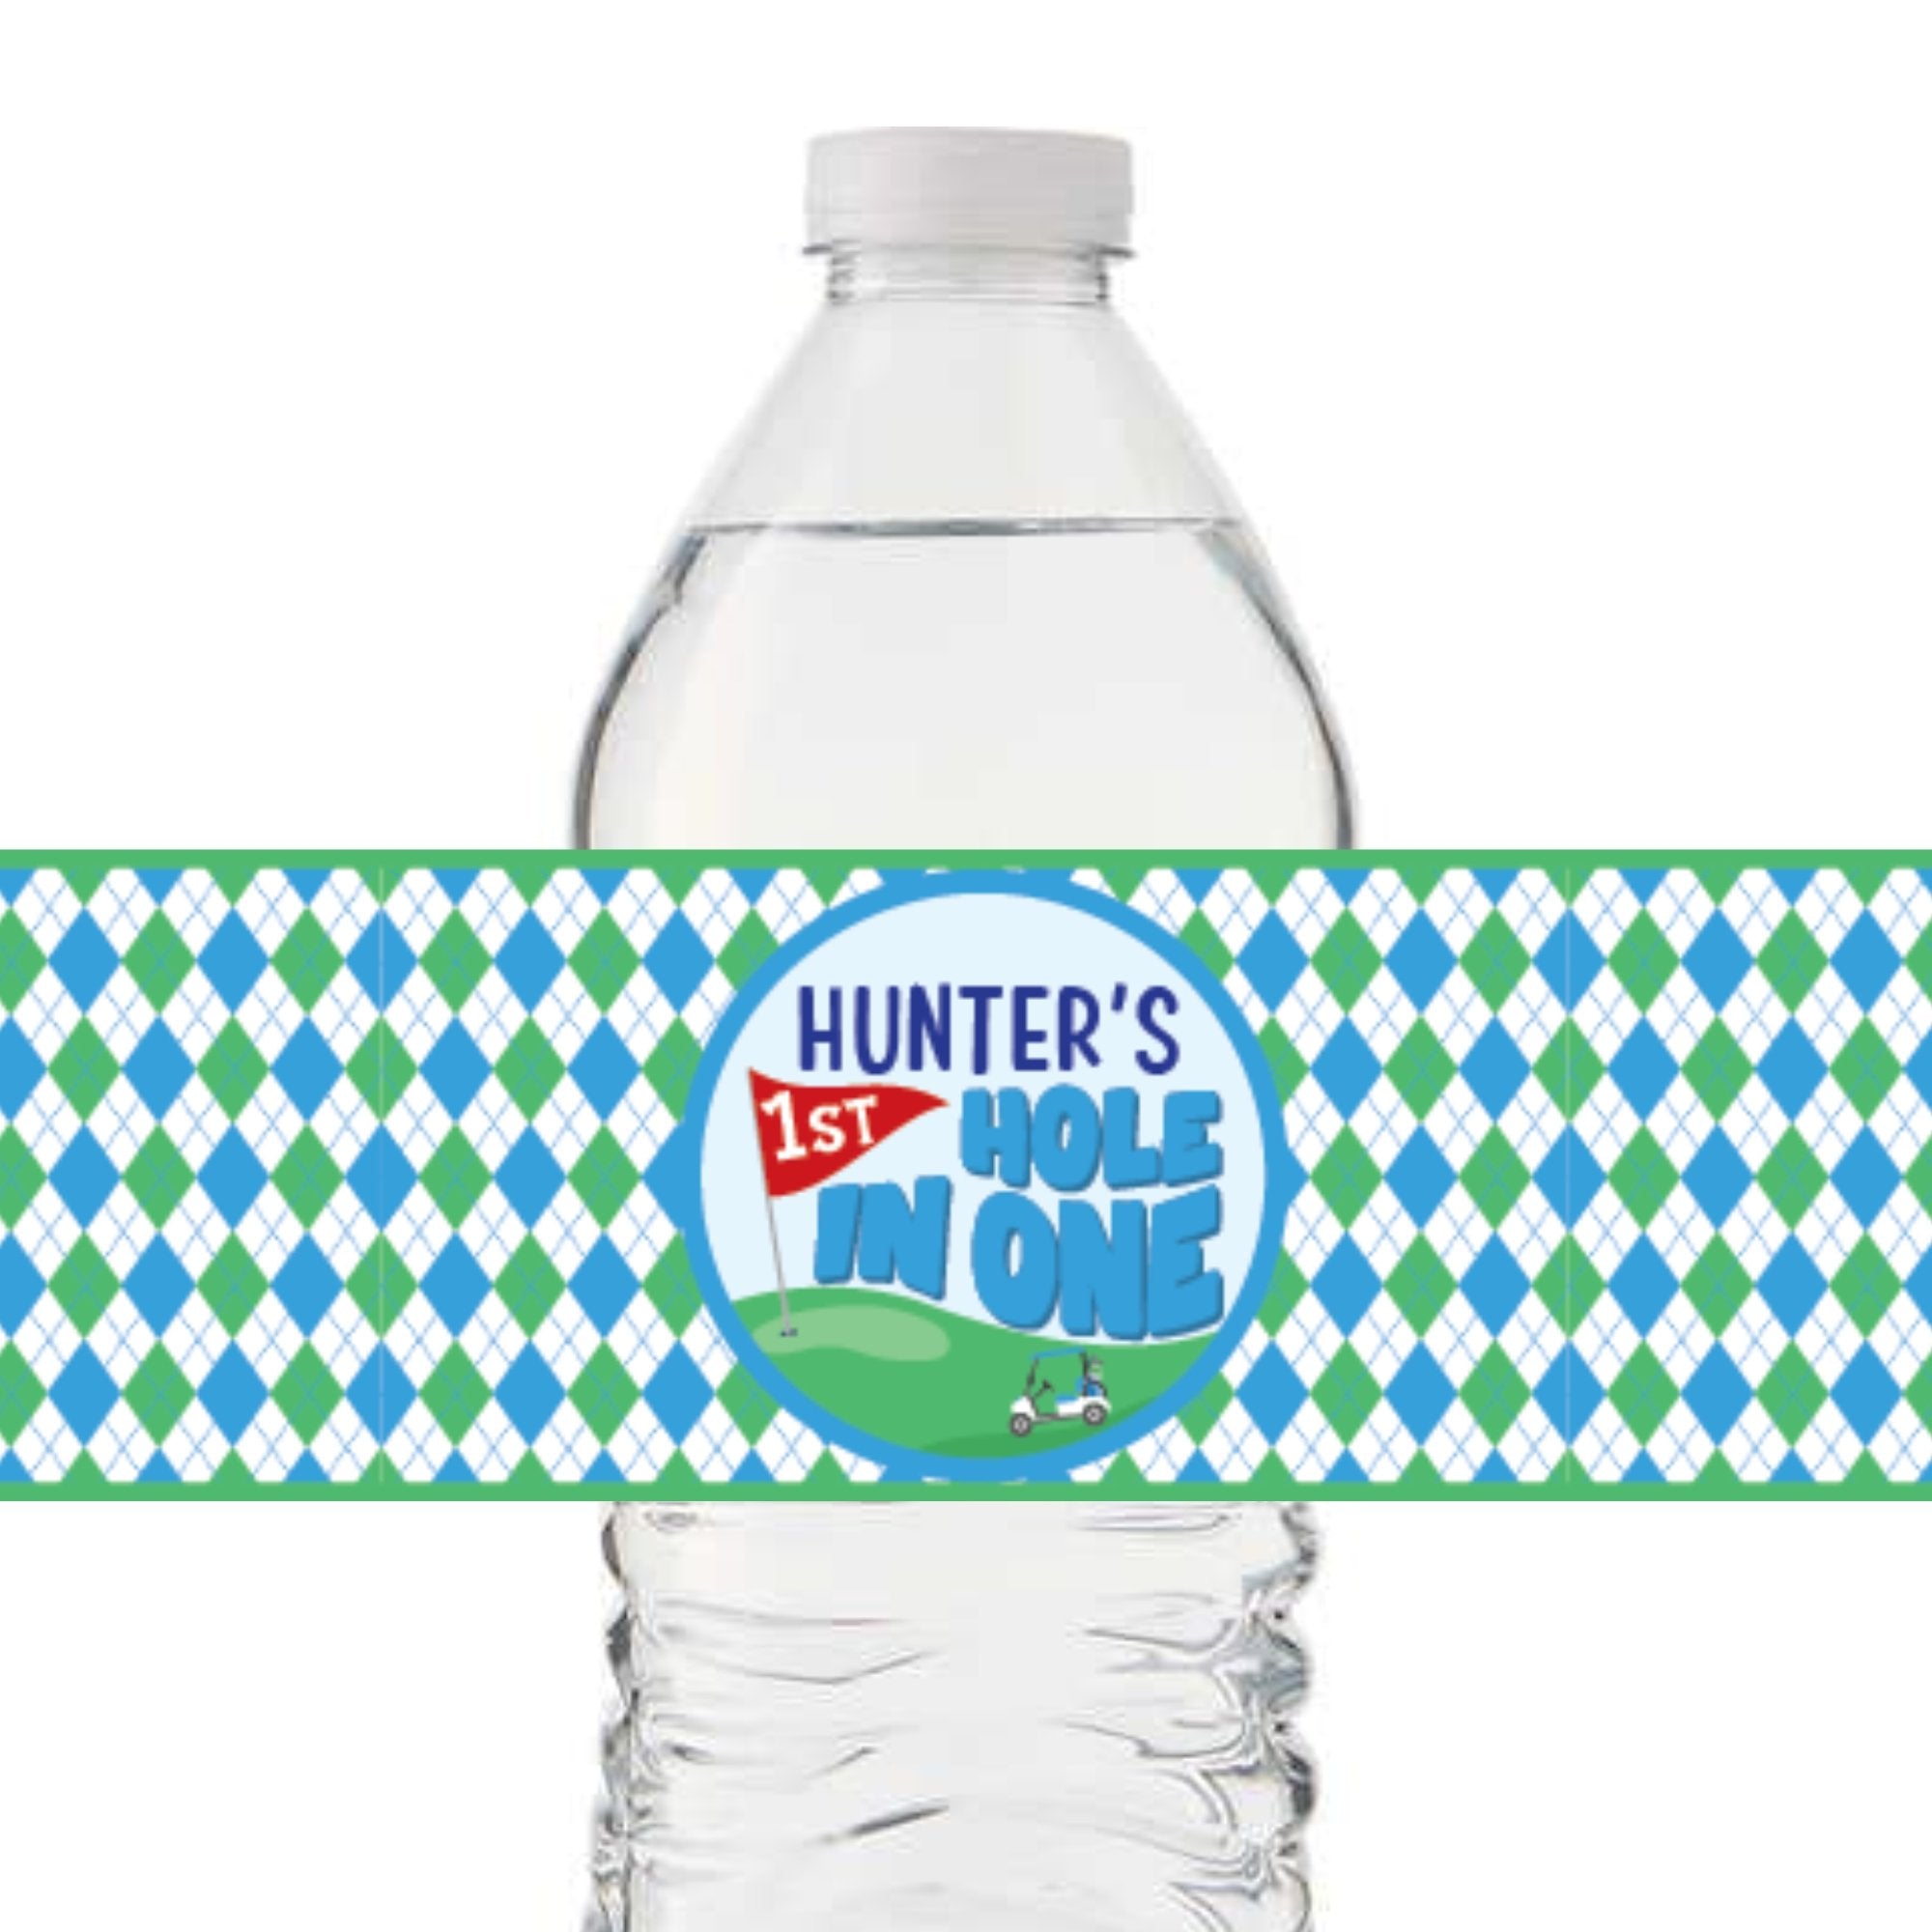 Custom Hole In One Water Bottle Label (Set of 10) - Blue - Sprinkled With Pink #bachelorette #custom #gifts